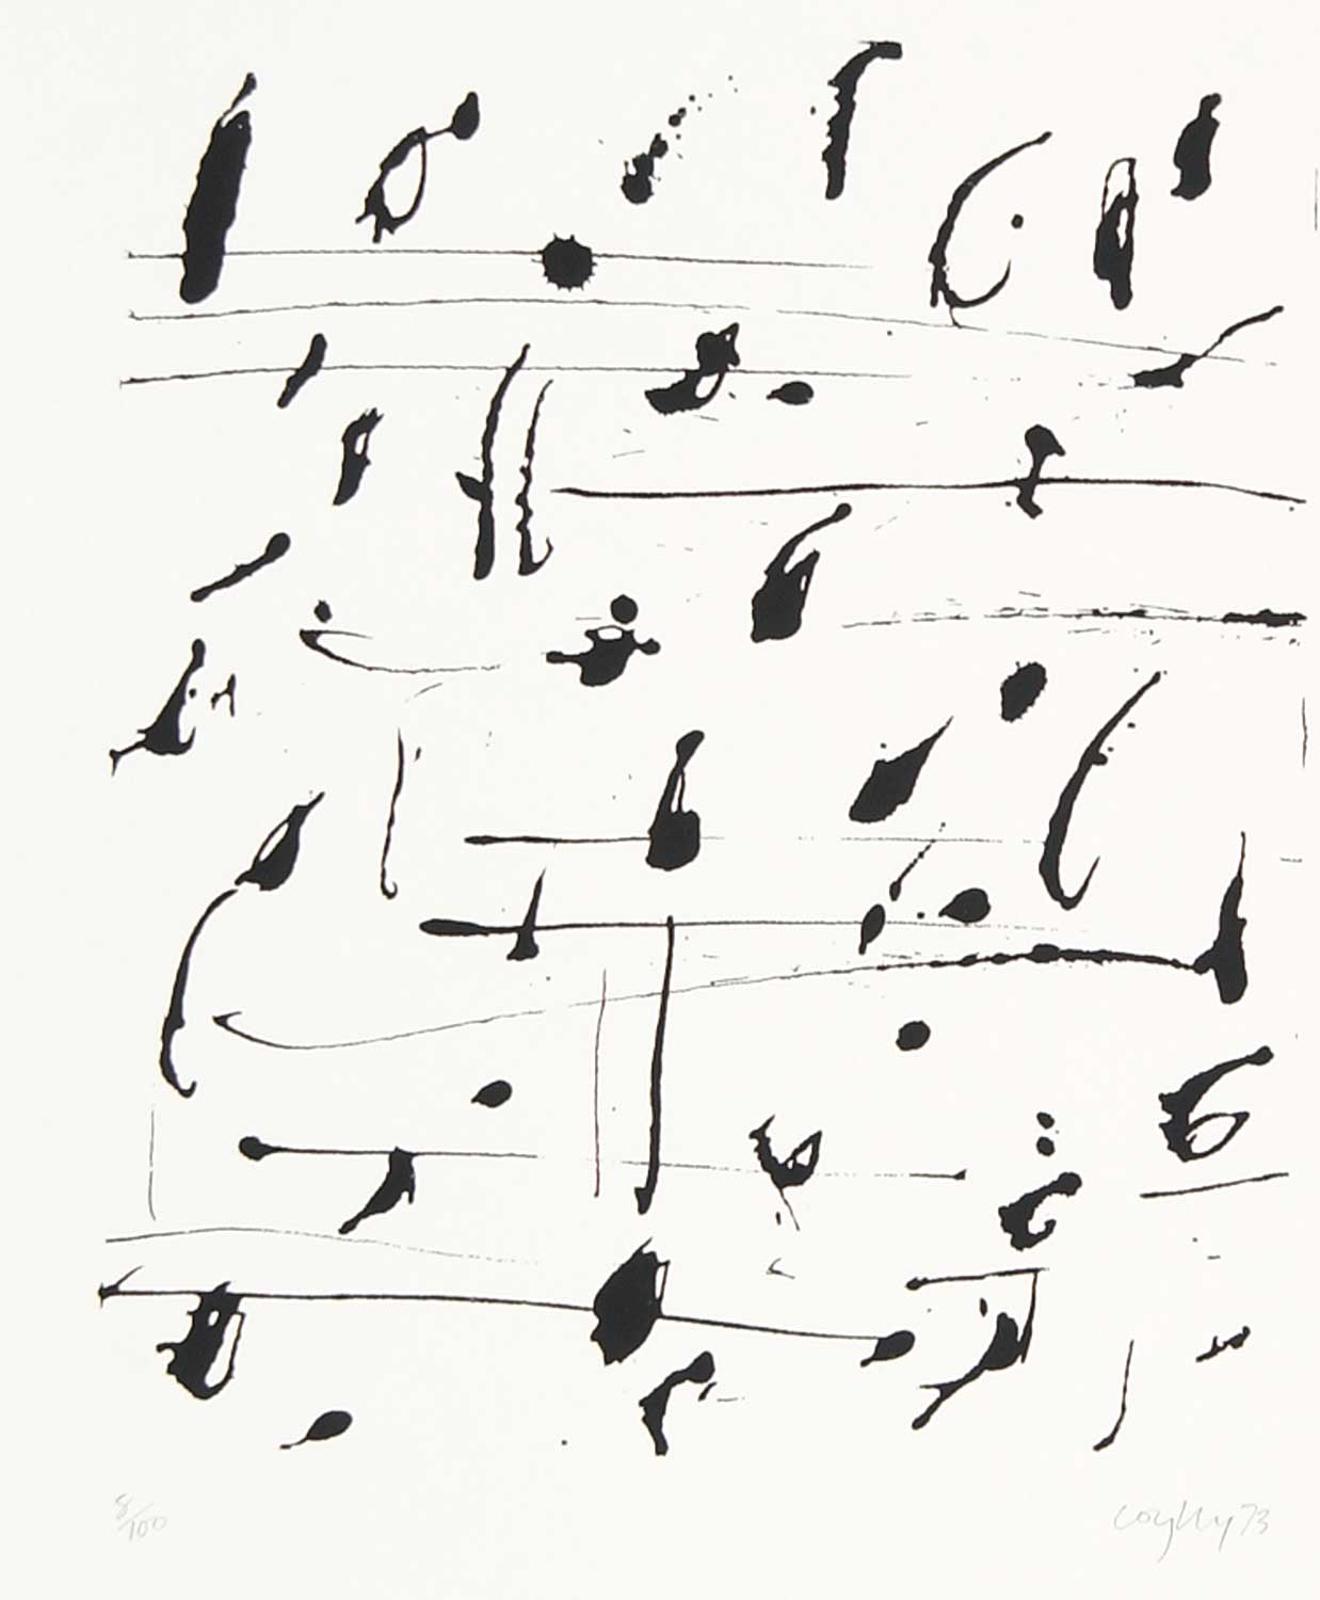 John Graham Coughtry (1931-1999) - Untitled - Black and White Musical Notes  #8/100